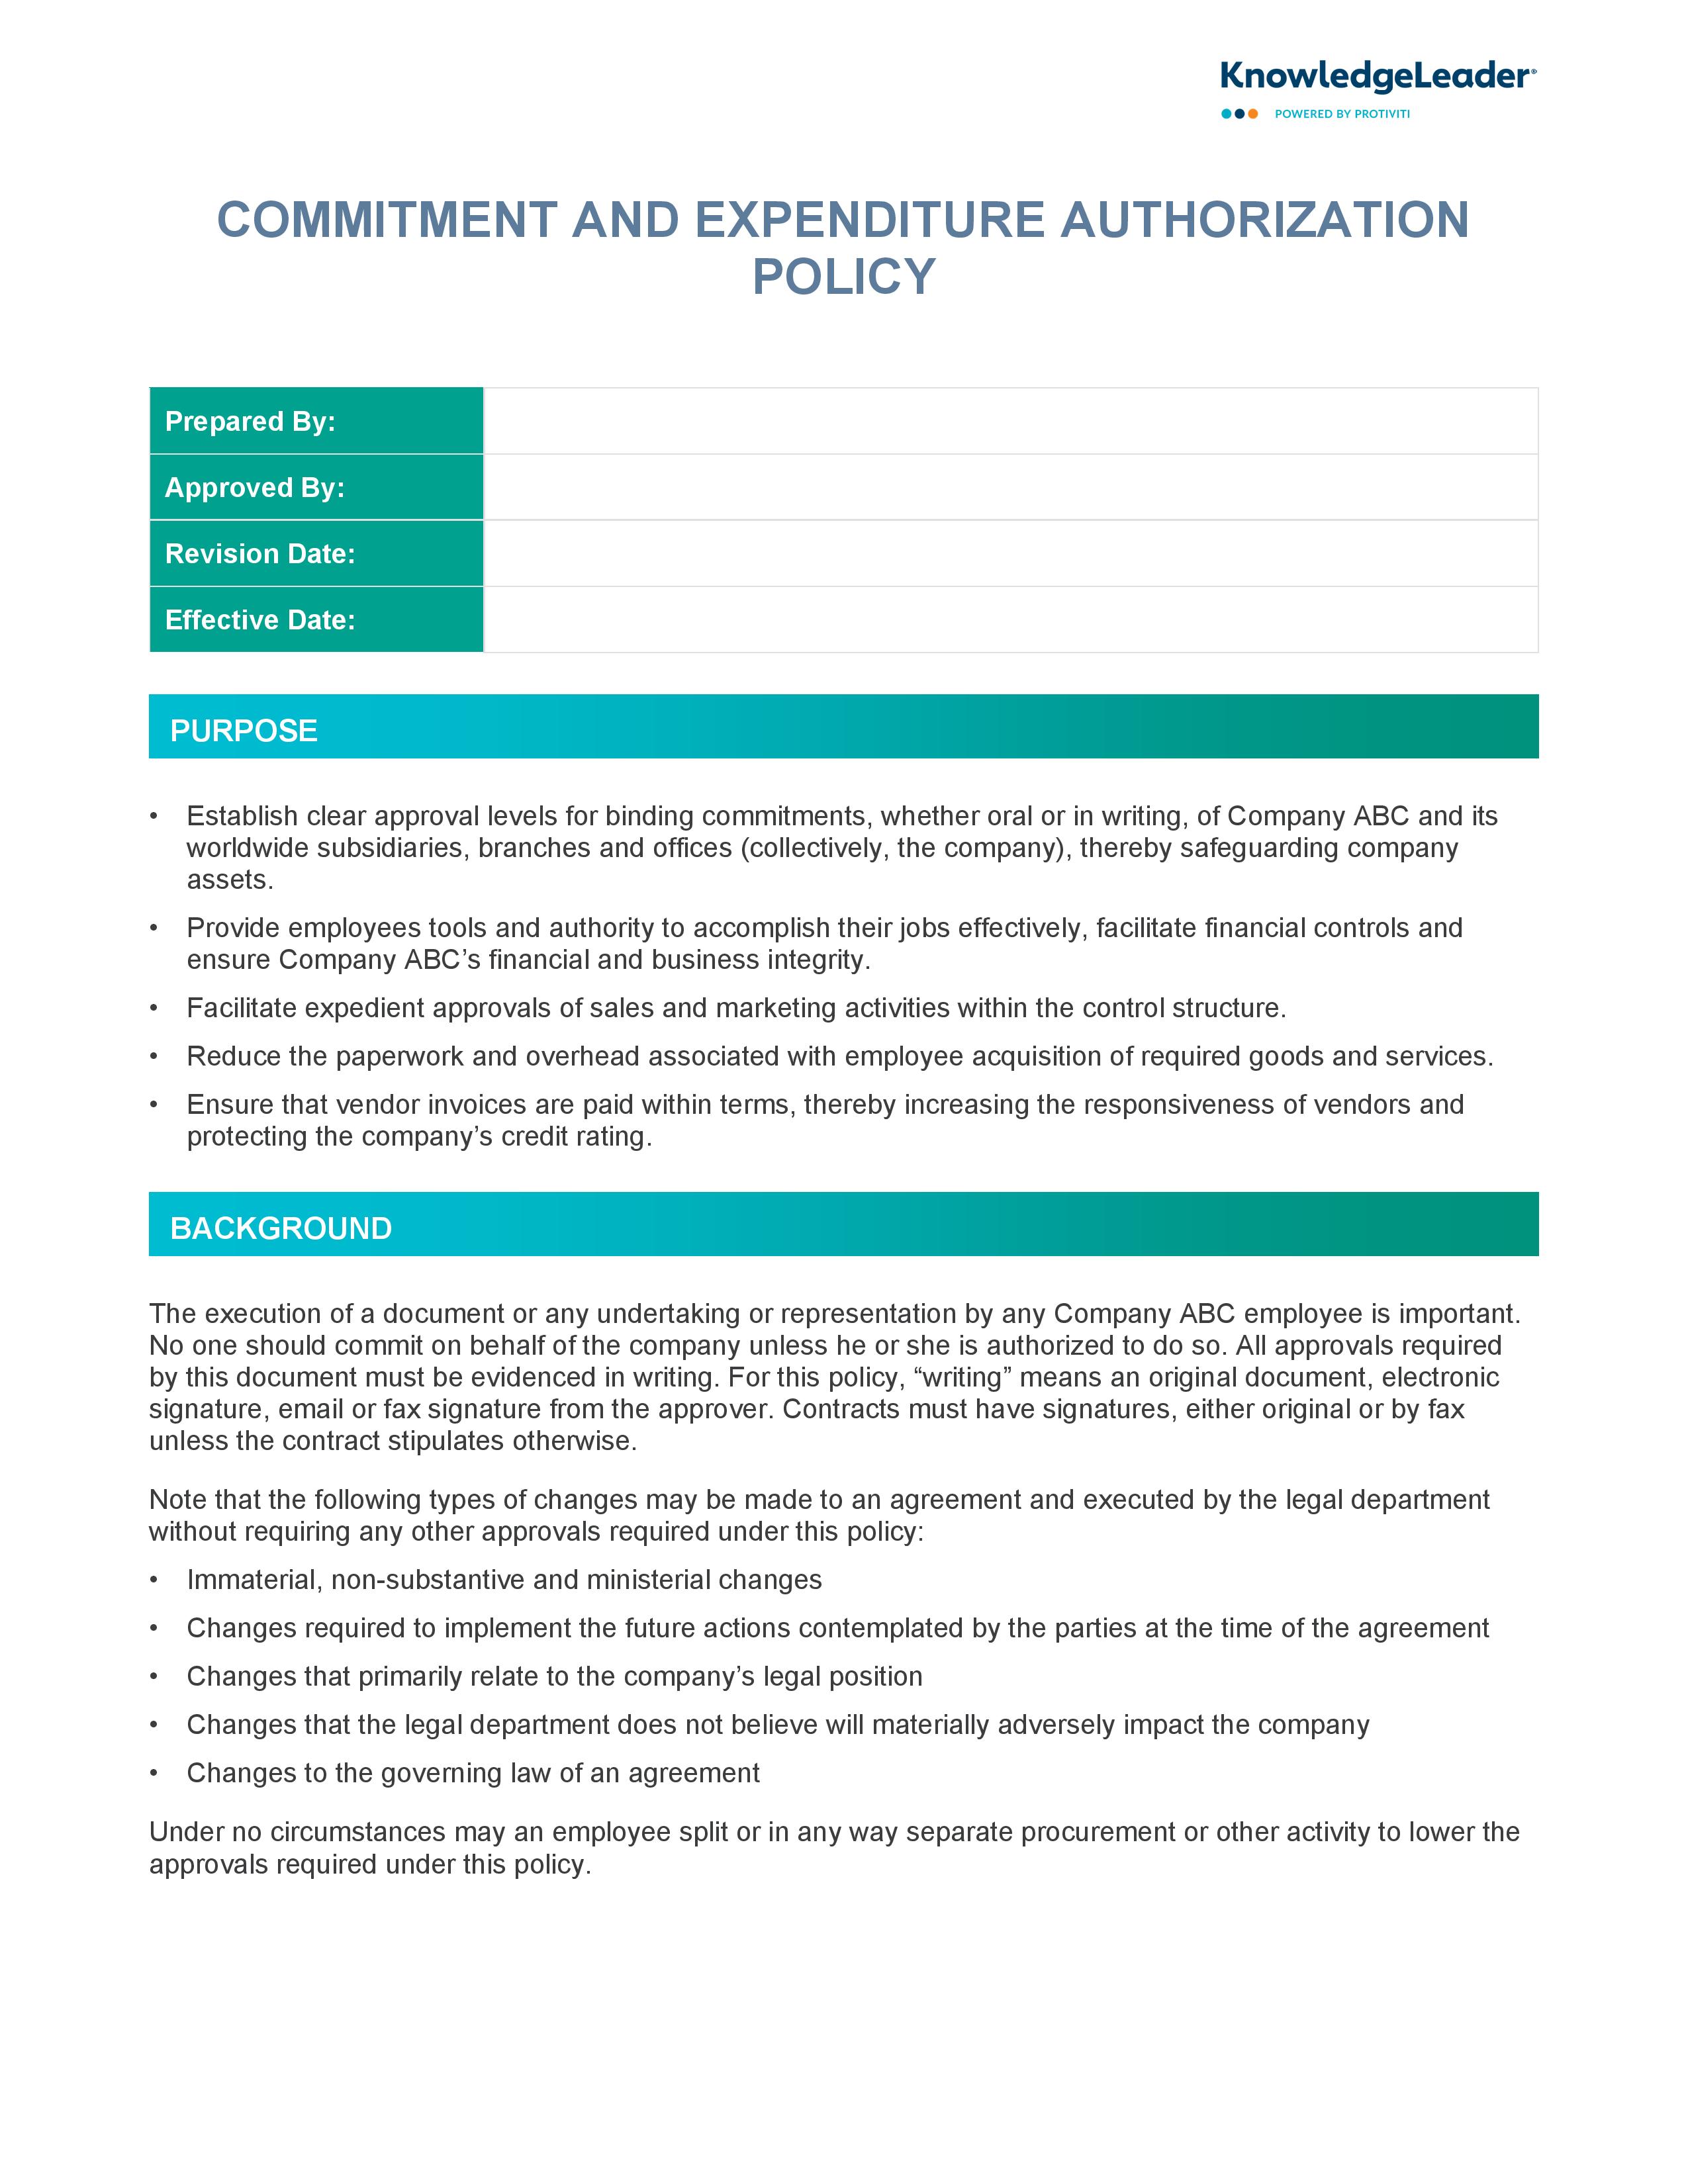 Screenshot of the First Page of Commitment and Expenditure Authorization Policy